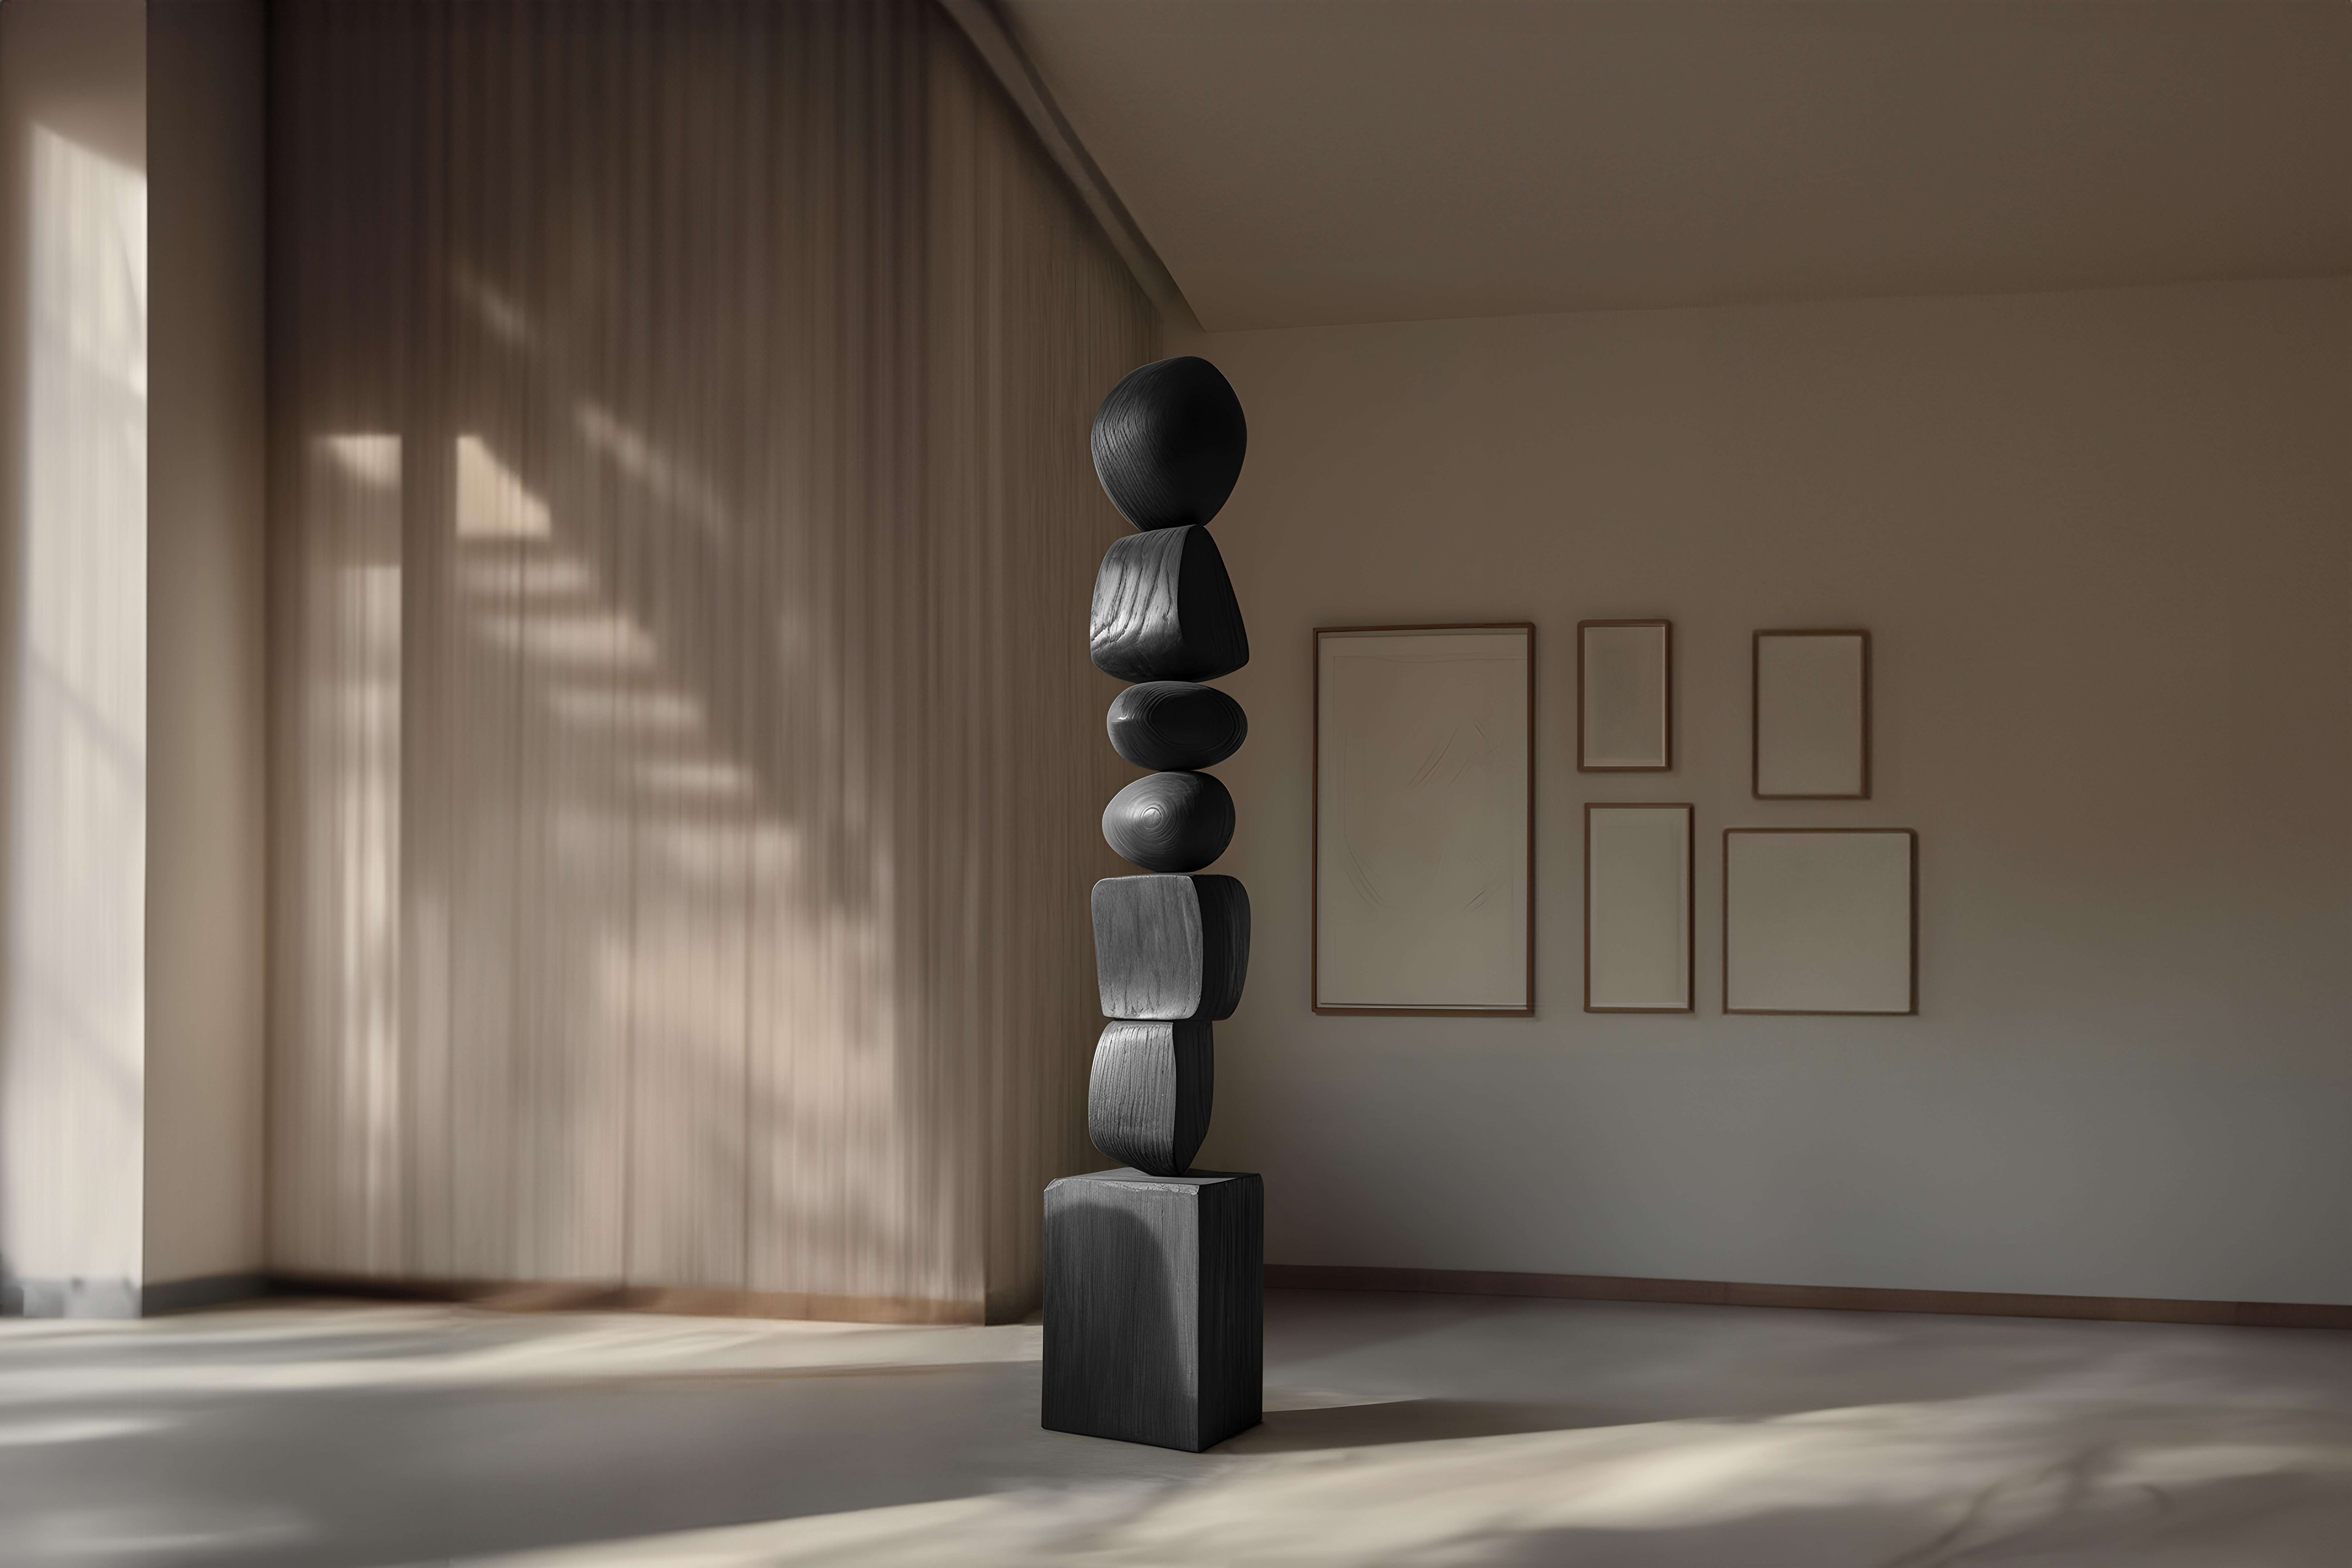 Brutalist Sleek, Dark Abstract Design in Black Solid Wood by Escalona, Still Stand No96 For Sale